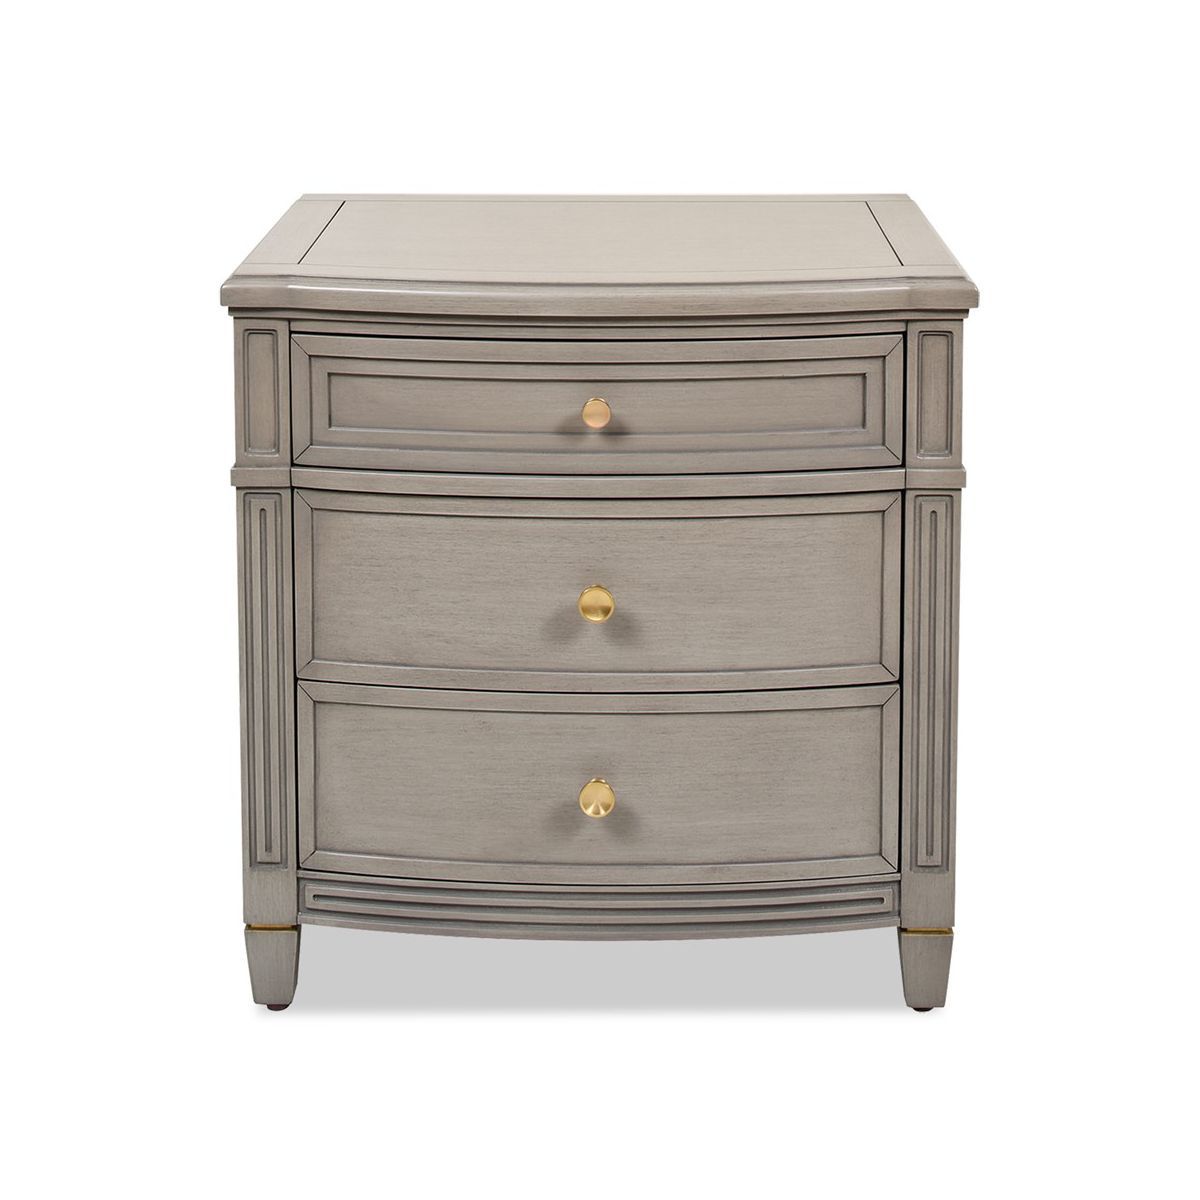 Dauphin Gold Accent End Table, Grey Cashmere Wood | Target